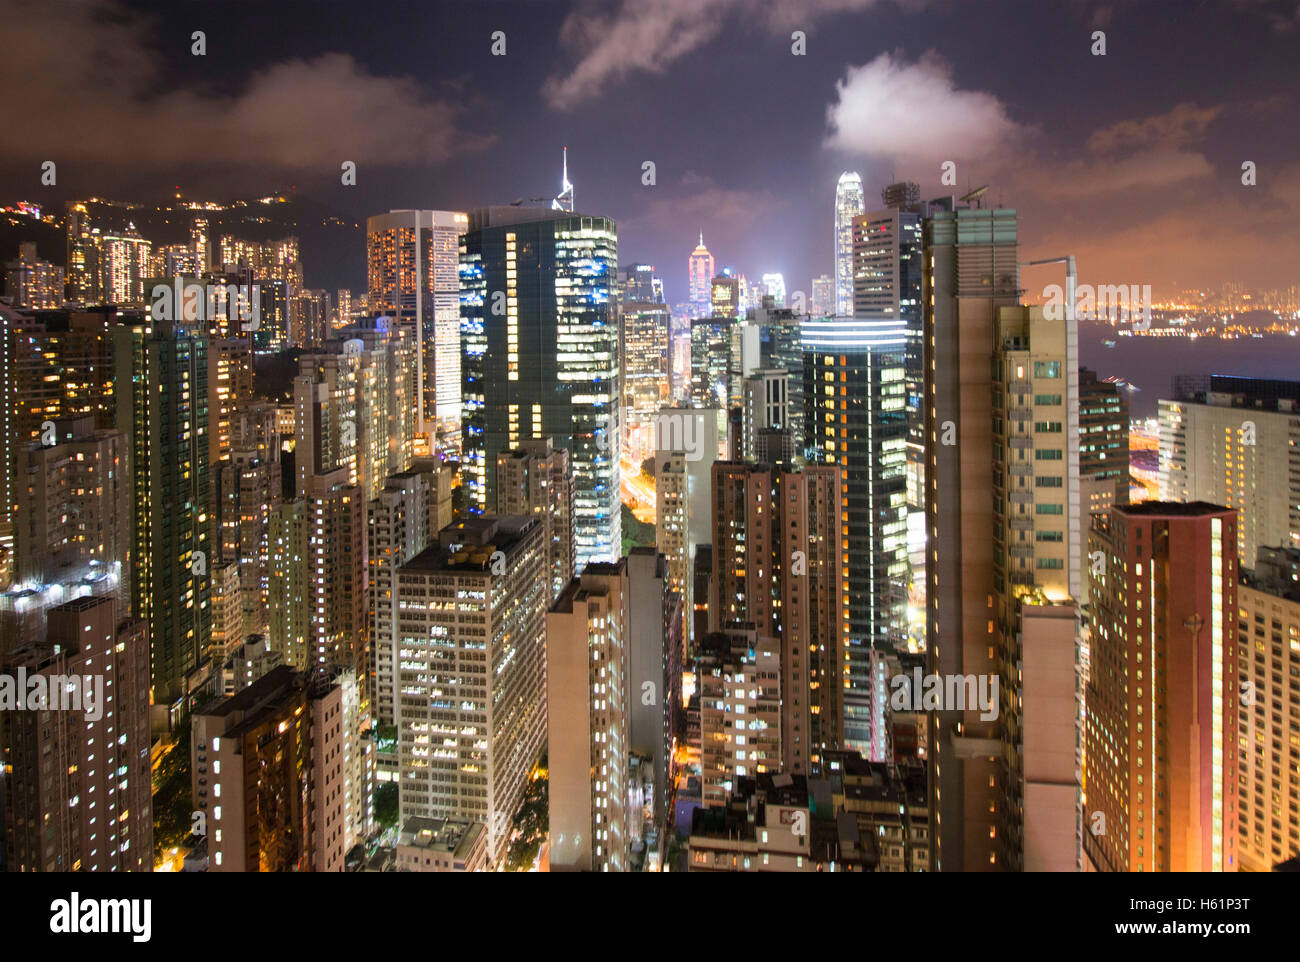 Skyscrapers business center of Hong Kong Island Wan Chai China Asia seen from rooftop terrace by night. Stock Photo